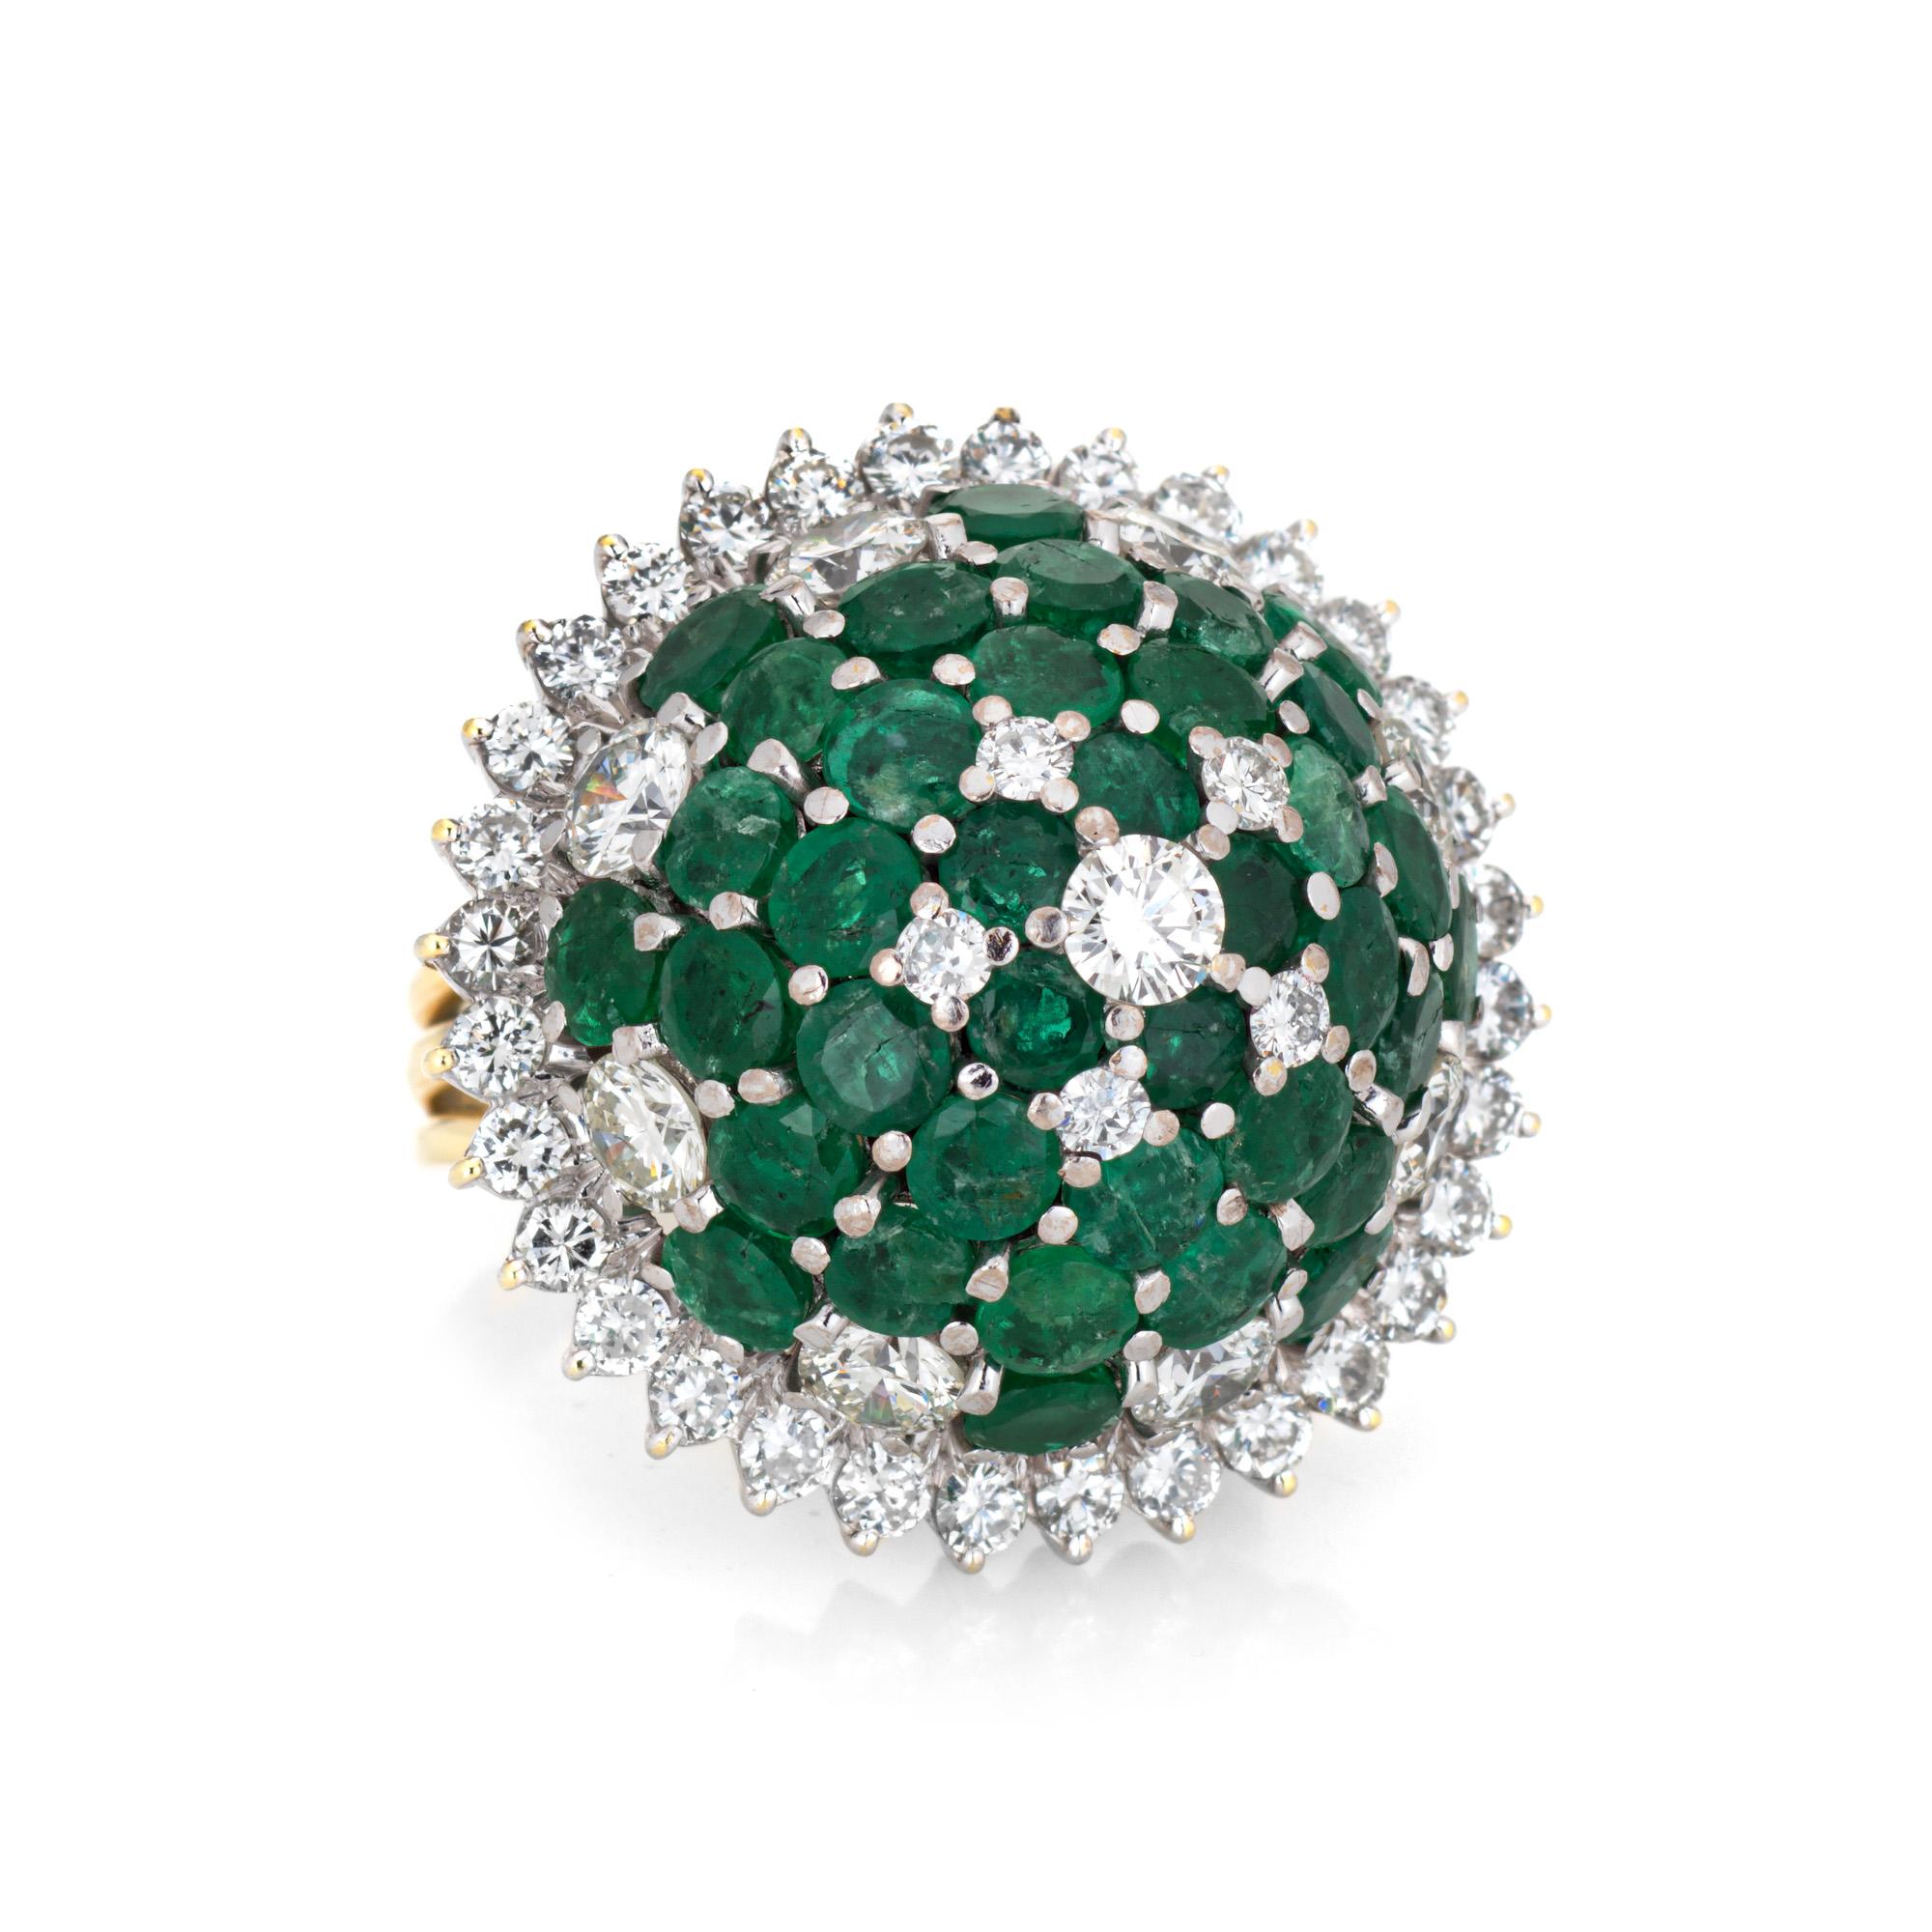 Stylish diamond & emerald cocktail ring crafted in 18 karat yellow & white gold (circa 1960s). 

Round brilliant cut diamonds total an estimated 2.50 carats (estimated at G-H color and VS2-SI1 clarity). Emeralds graduate in size from 2mm to 3mm. The